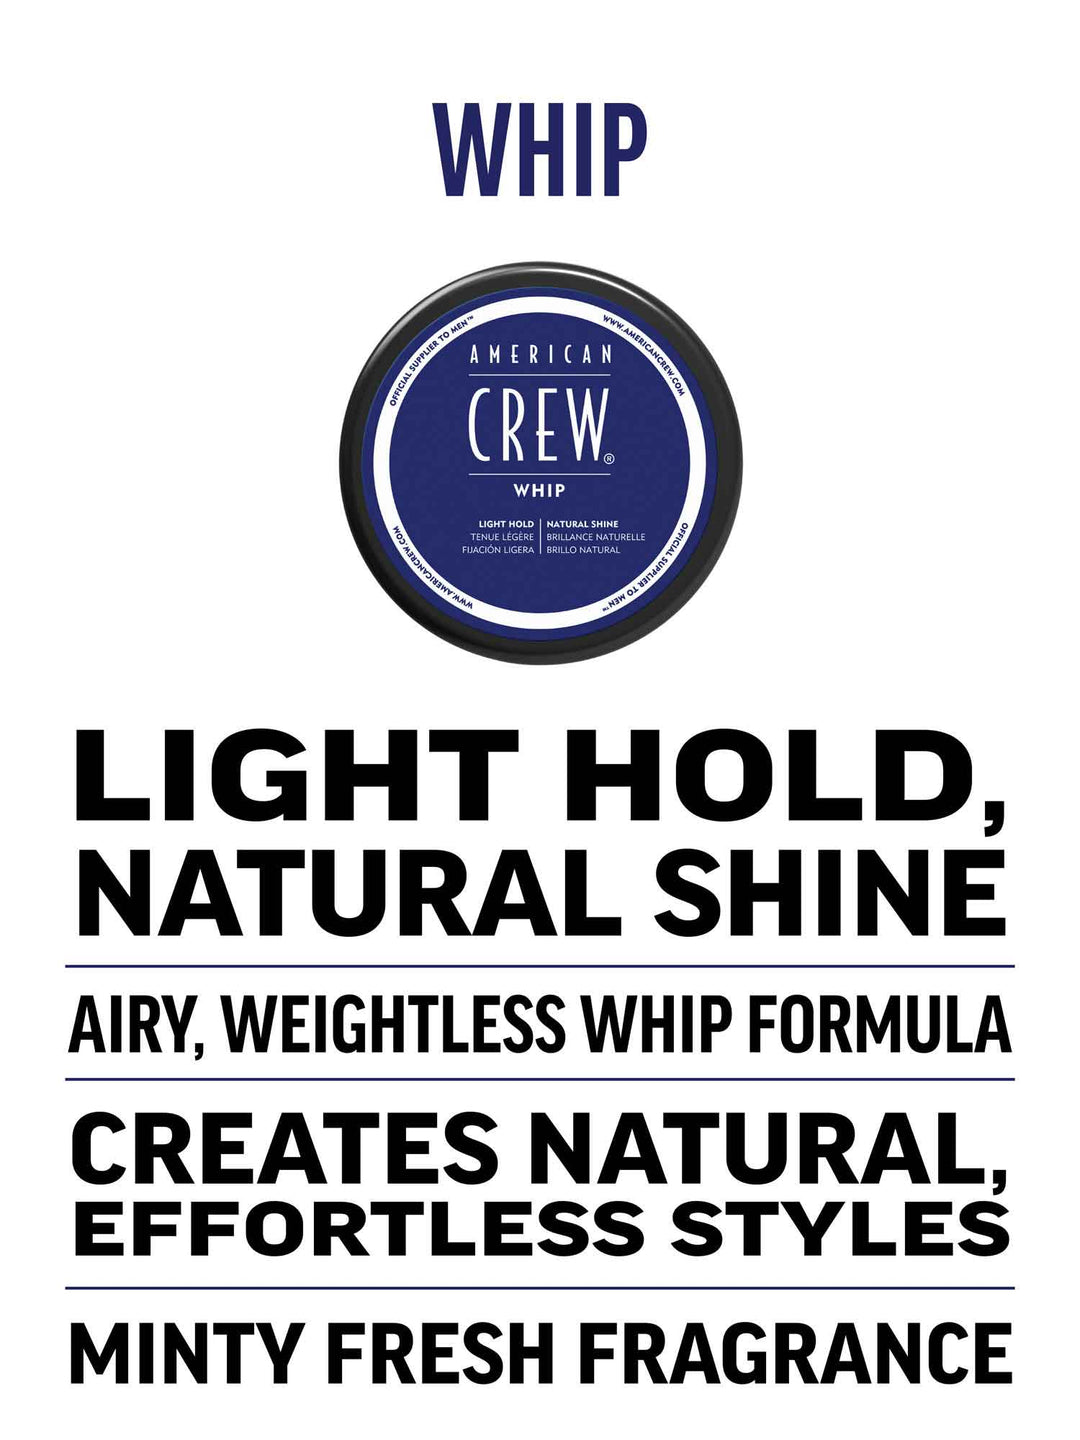 Whip- airy, weightless, whip formula, delivers nature and effortless looks, provides fullness, volume and light hold, and minty fresh fragrance